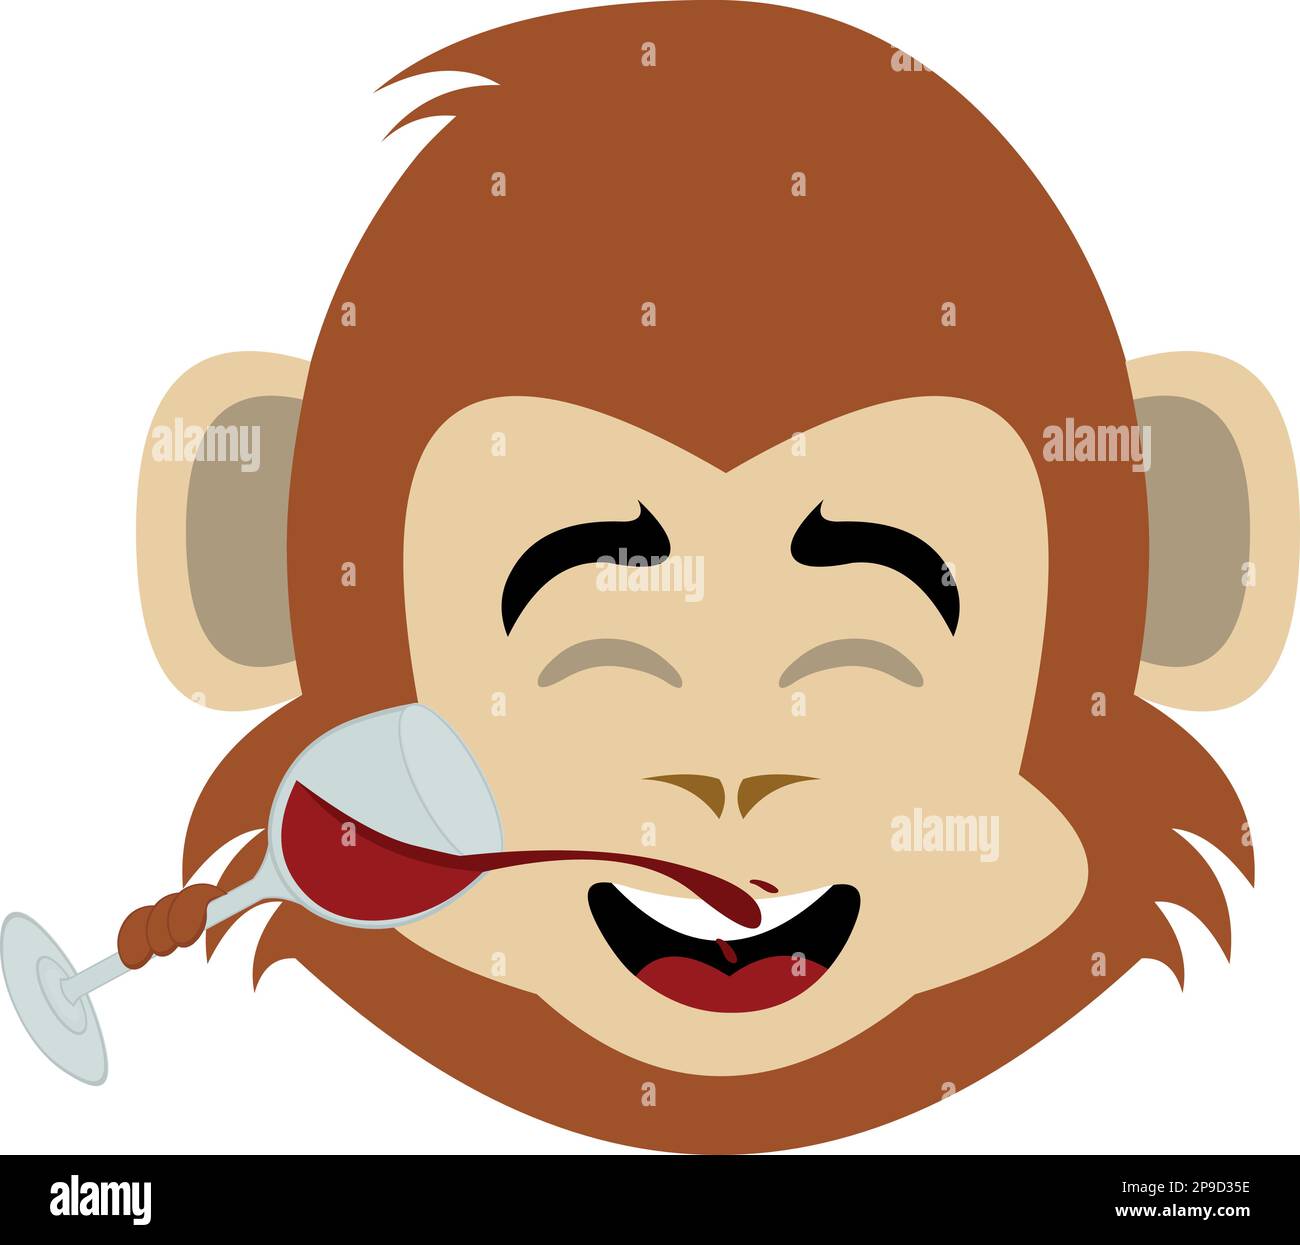 vector illustration face of a cartoon monkey drinking a glass of wine Stock Vector